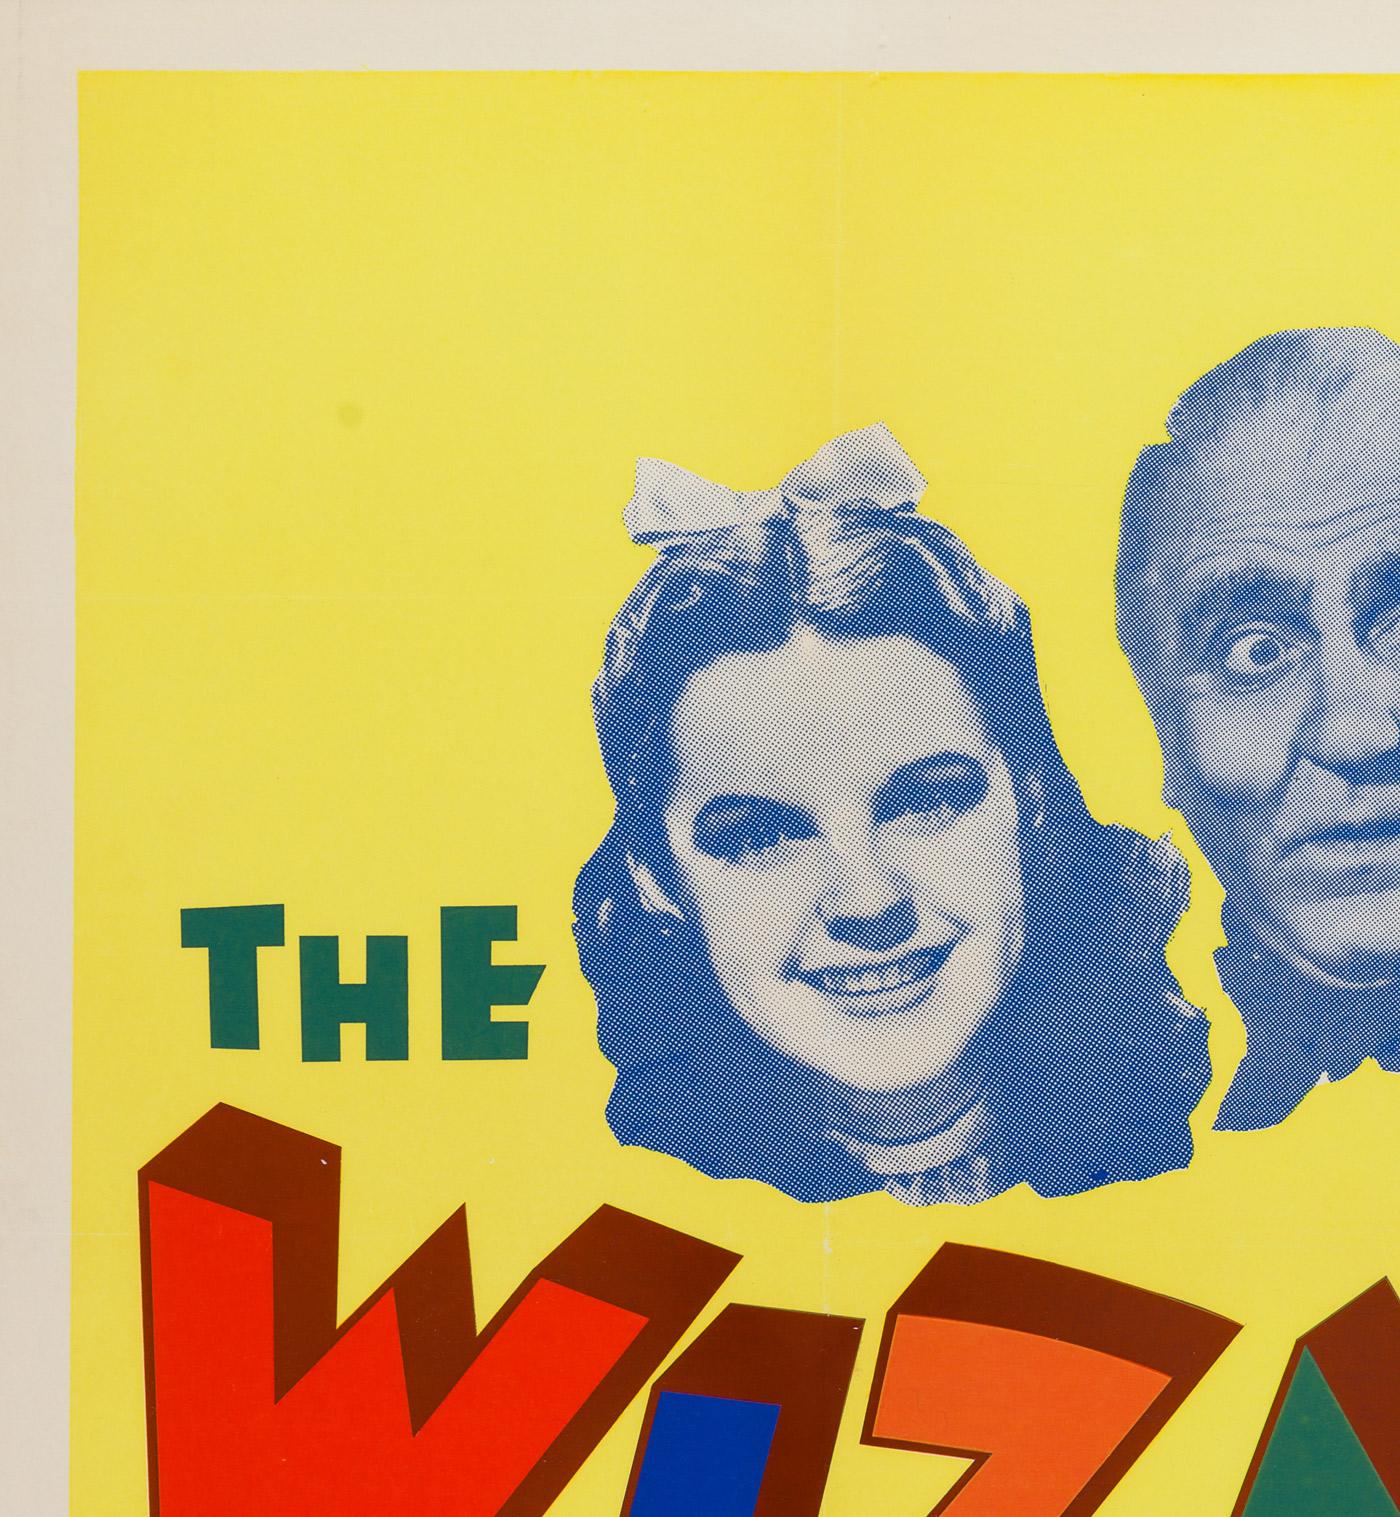 A very rare early re-release (1959) vintage UK quad for MGM's charming Classic movie The Wizard of Oz starring Judy Garland and Frank Morgan.

Professionally cleaned, de-acidified and linen-backed.

Actual film poster size is 30 x 40 (32 x 42